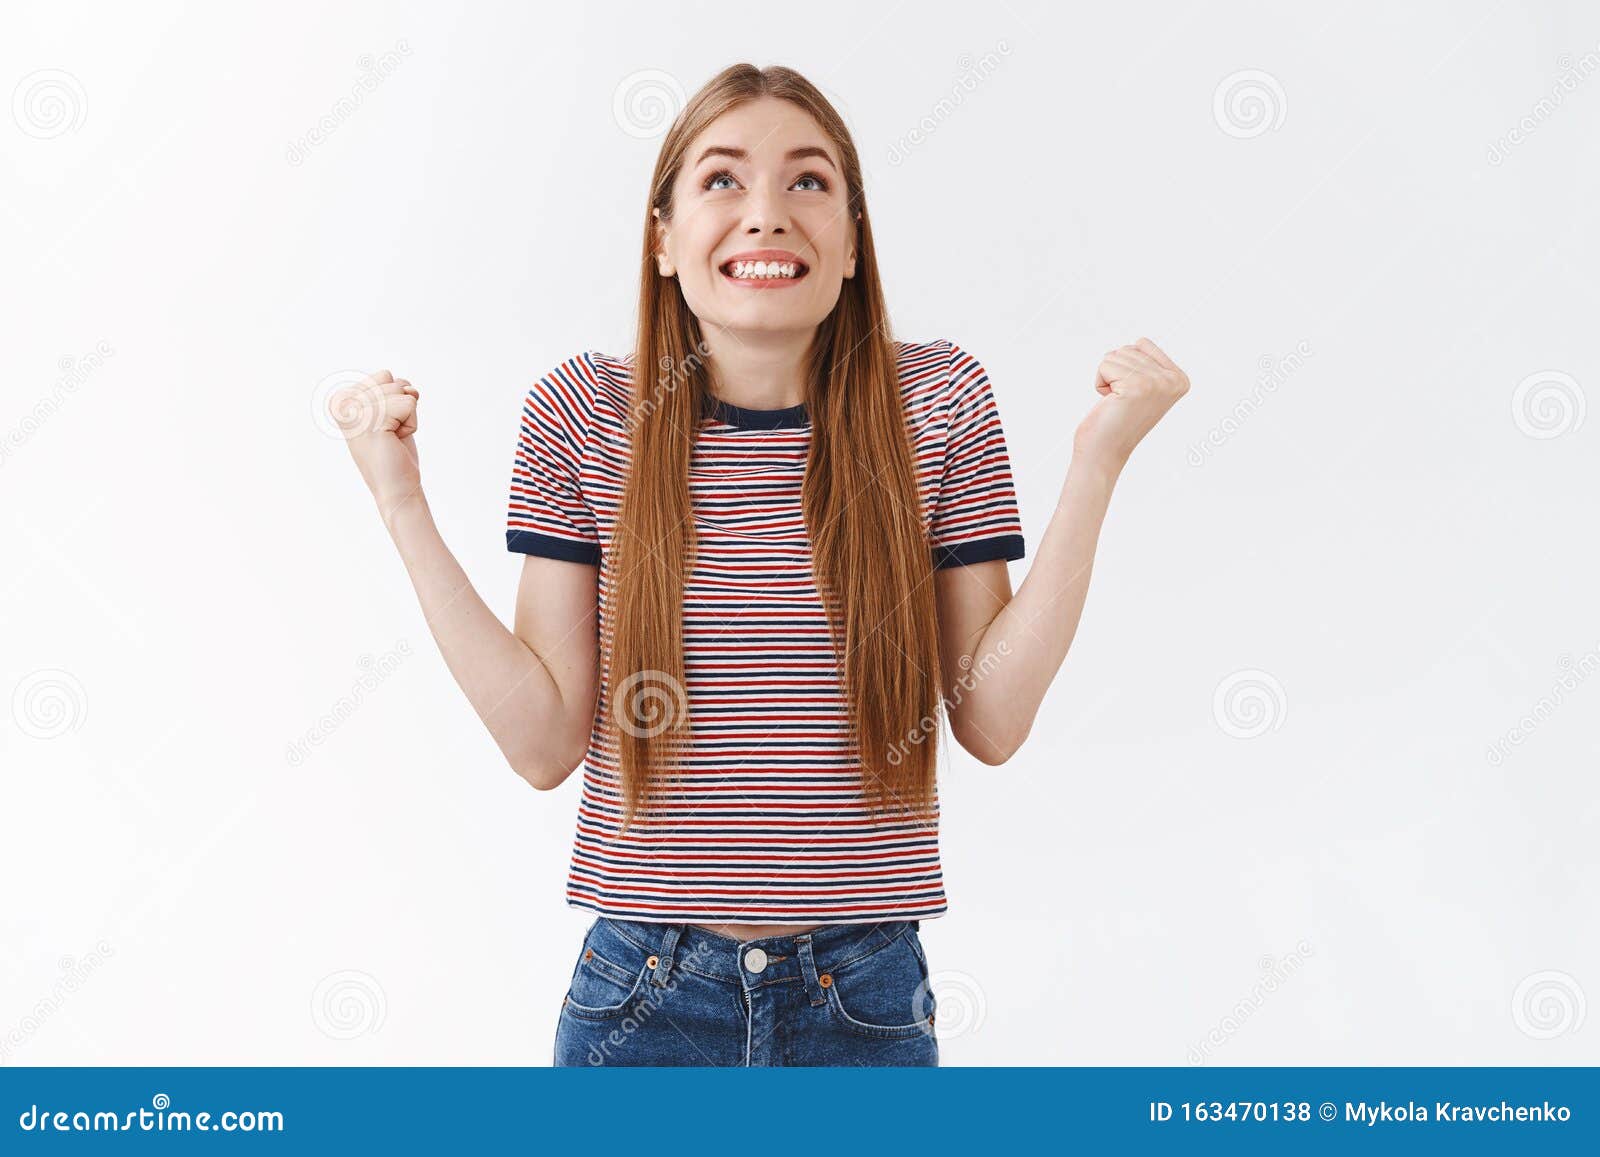 Relieved Happy Good Looking Woman In Striped T Shirt